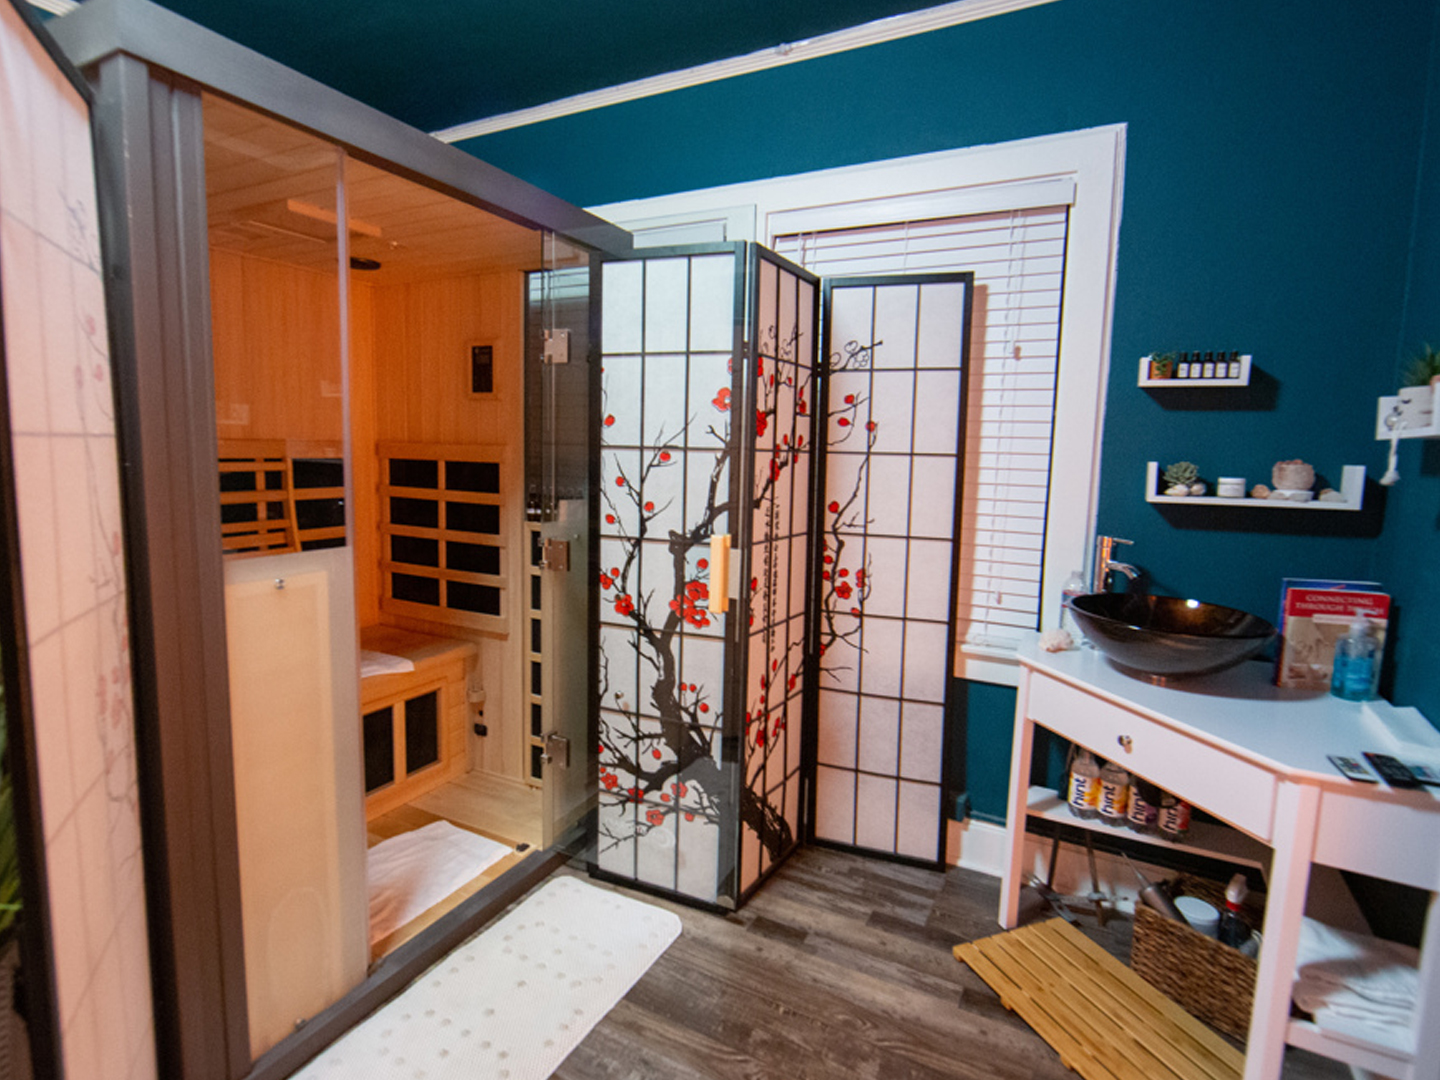 Halotherapy and Infrared Sauna at Jardin's Magical Hands in Sacramento, ca